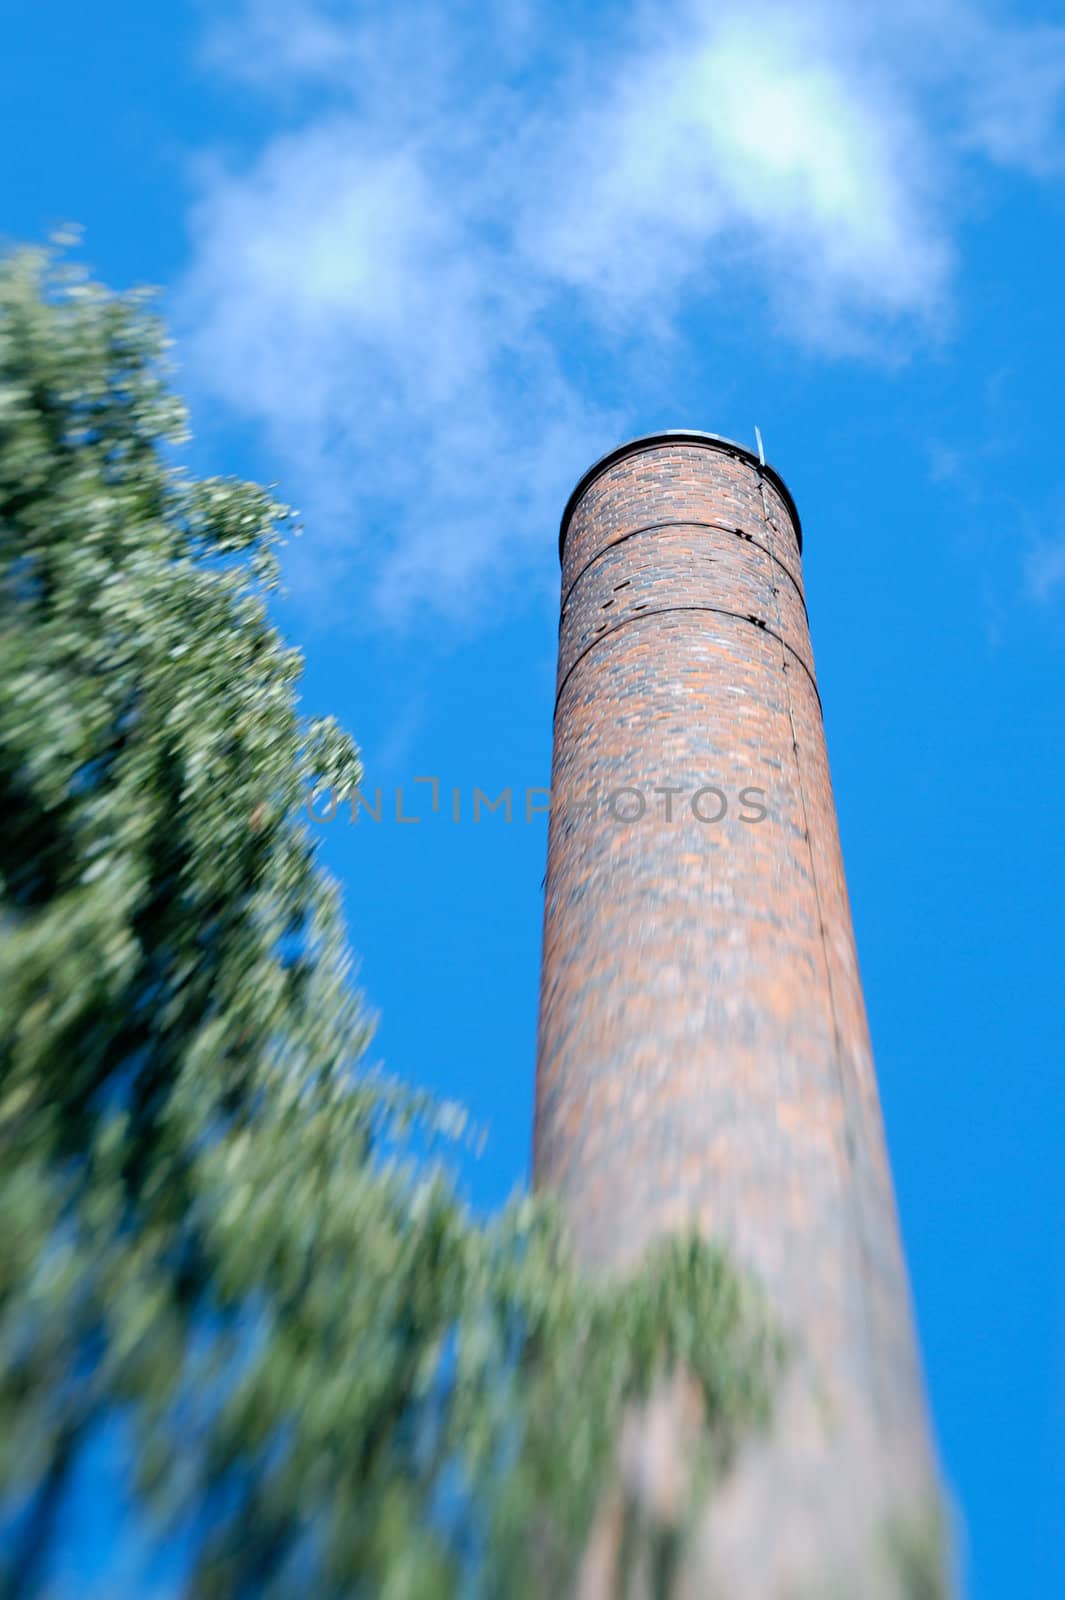 Old factory chimney made of brick. The zoom blur effect is achieved in-camera through use of Lensbaby.
